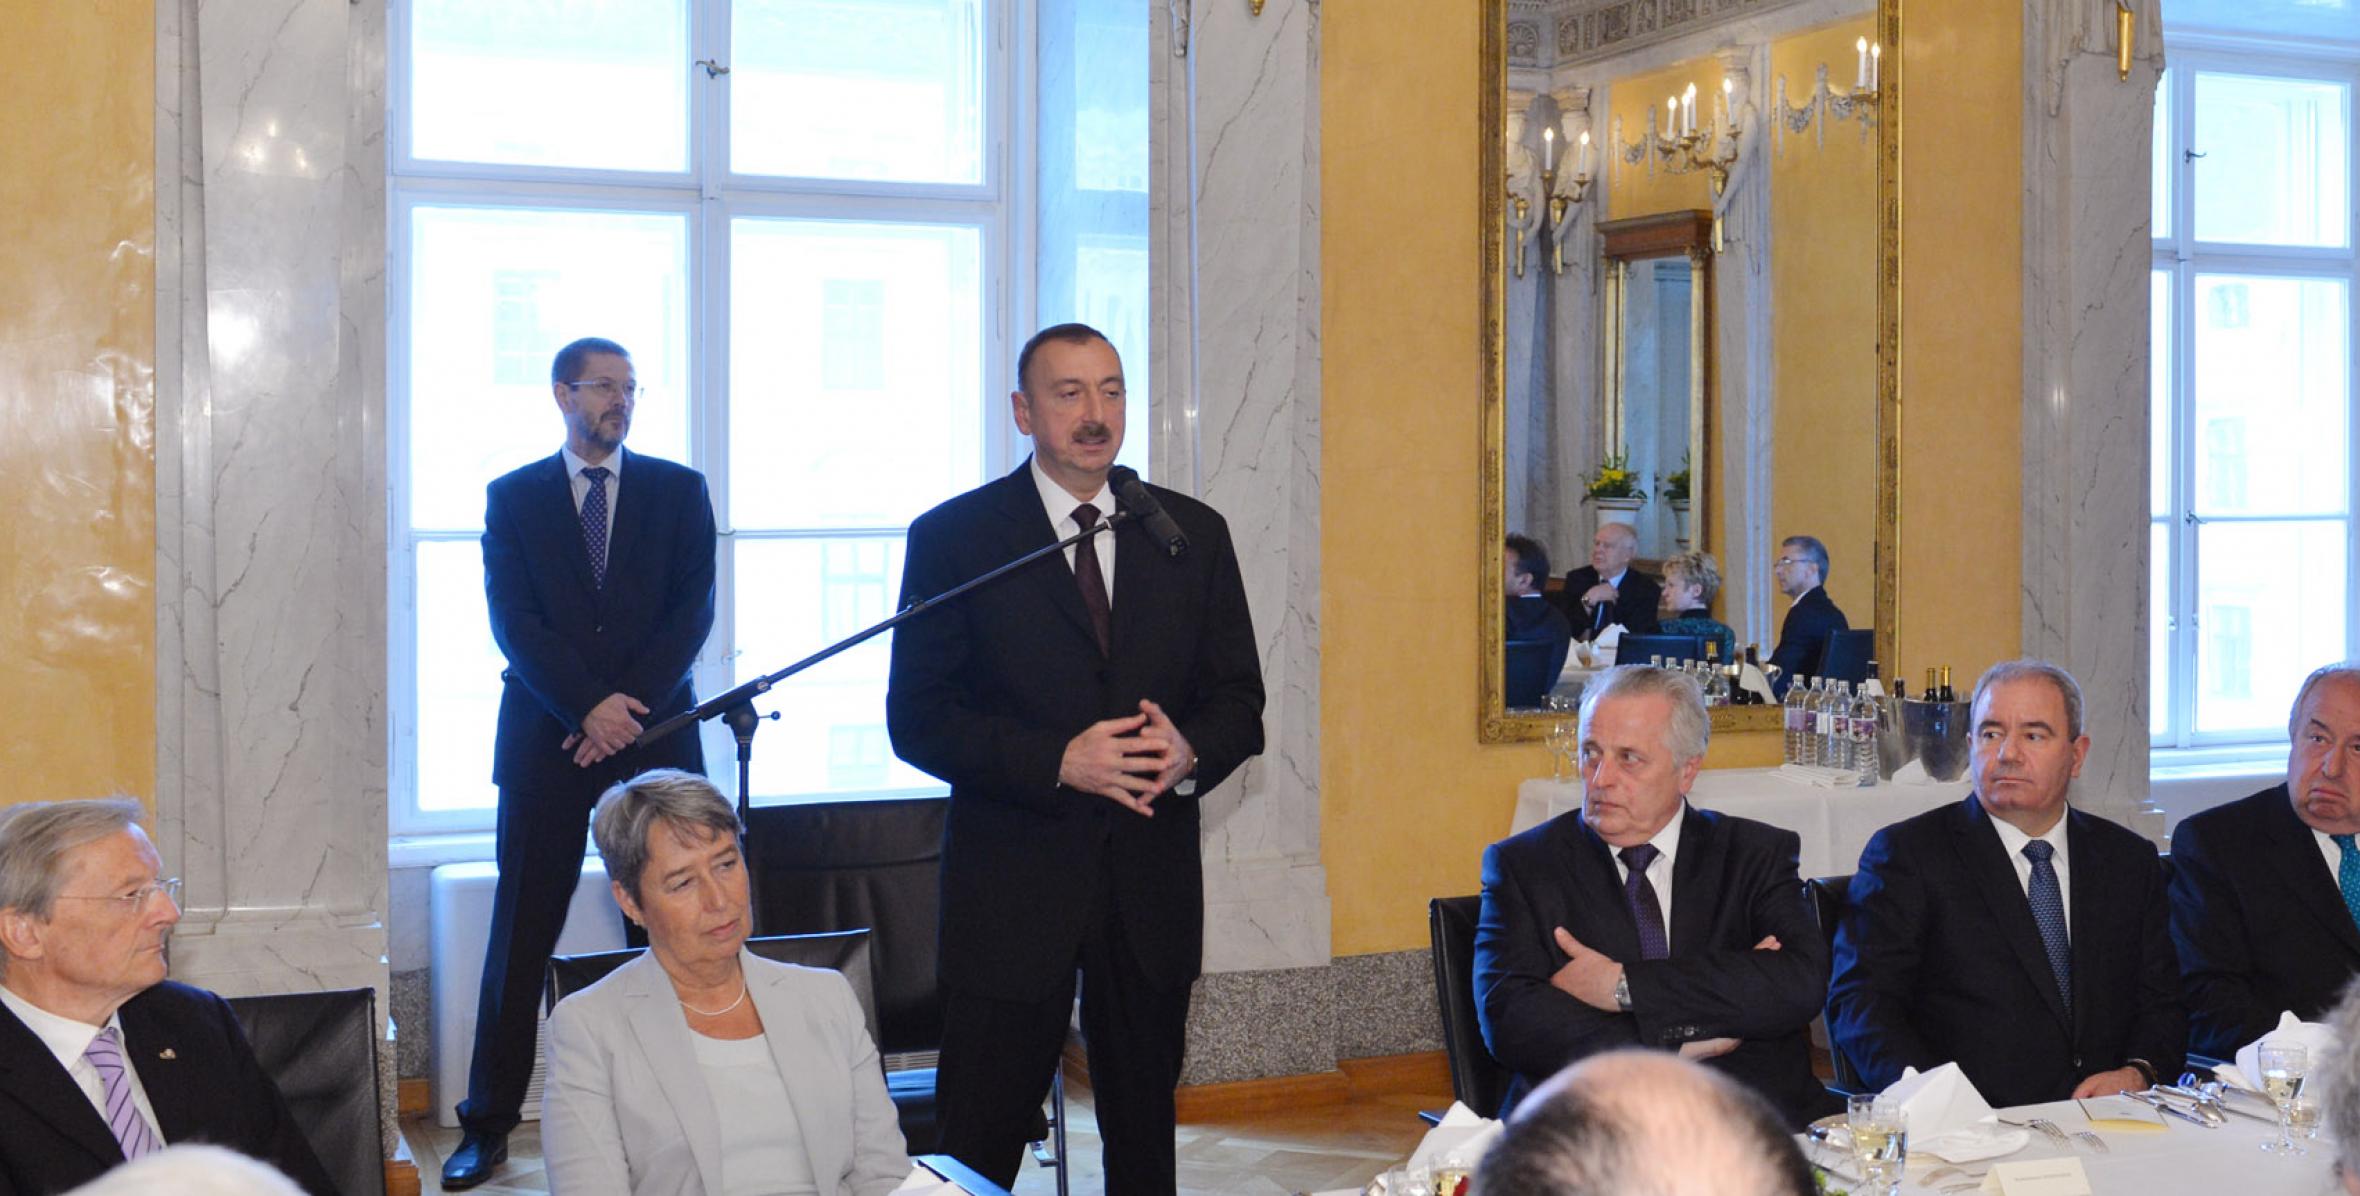 Official lunch reception was hosted in honor of Ilham Aliyev and his wife Mehriban Aliyeva in Vienna